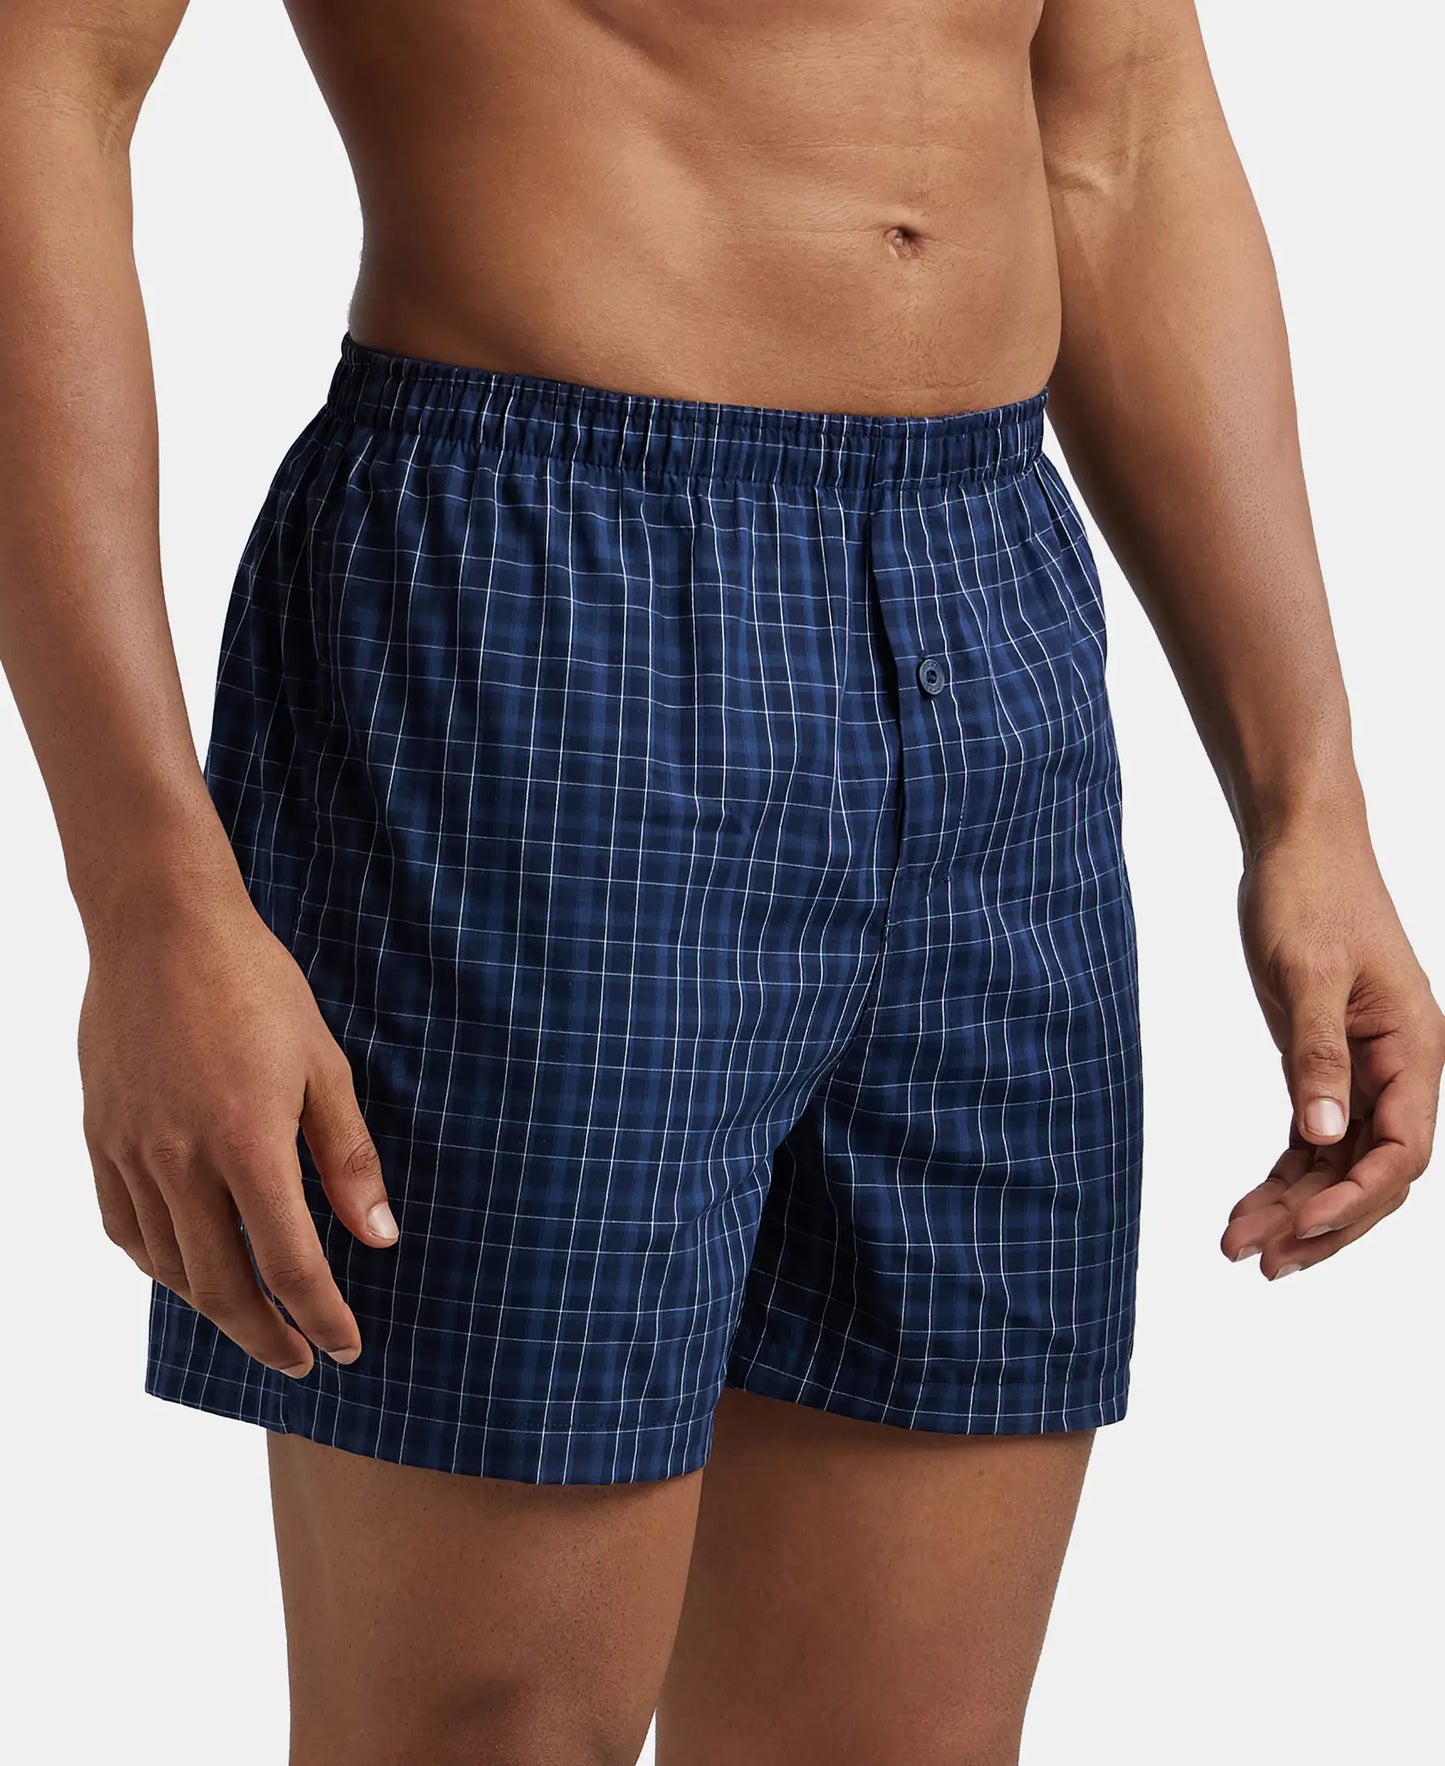 Super Combed Mercerized Cotton Woven Checkered Inner Boxers with Ultrasoft and Durable Inner Waistband - Navy-4